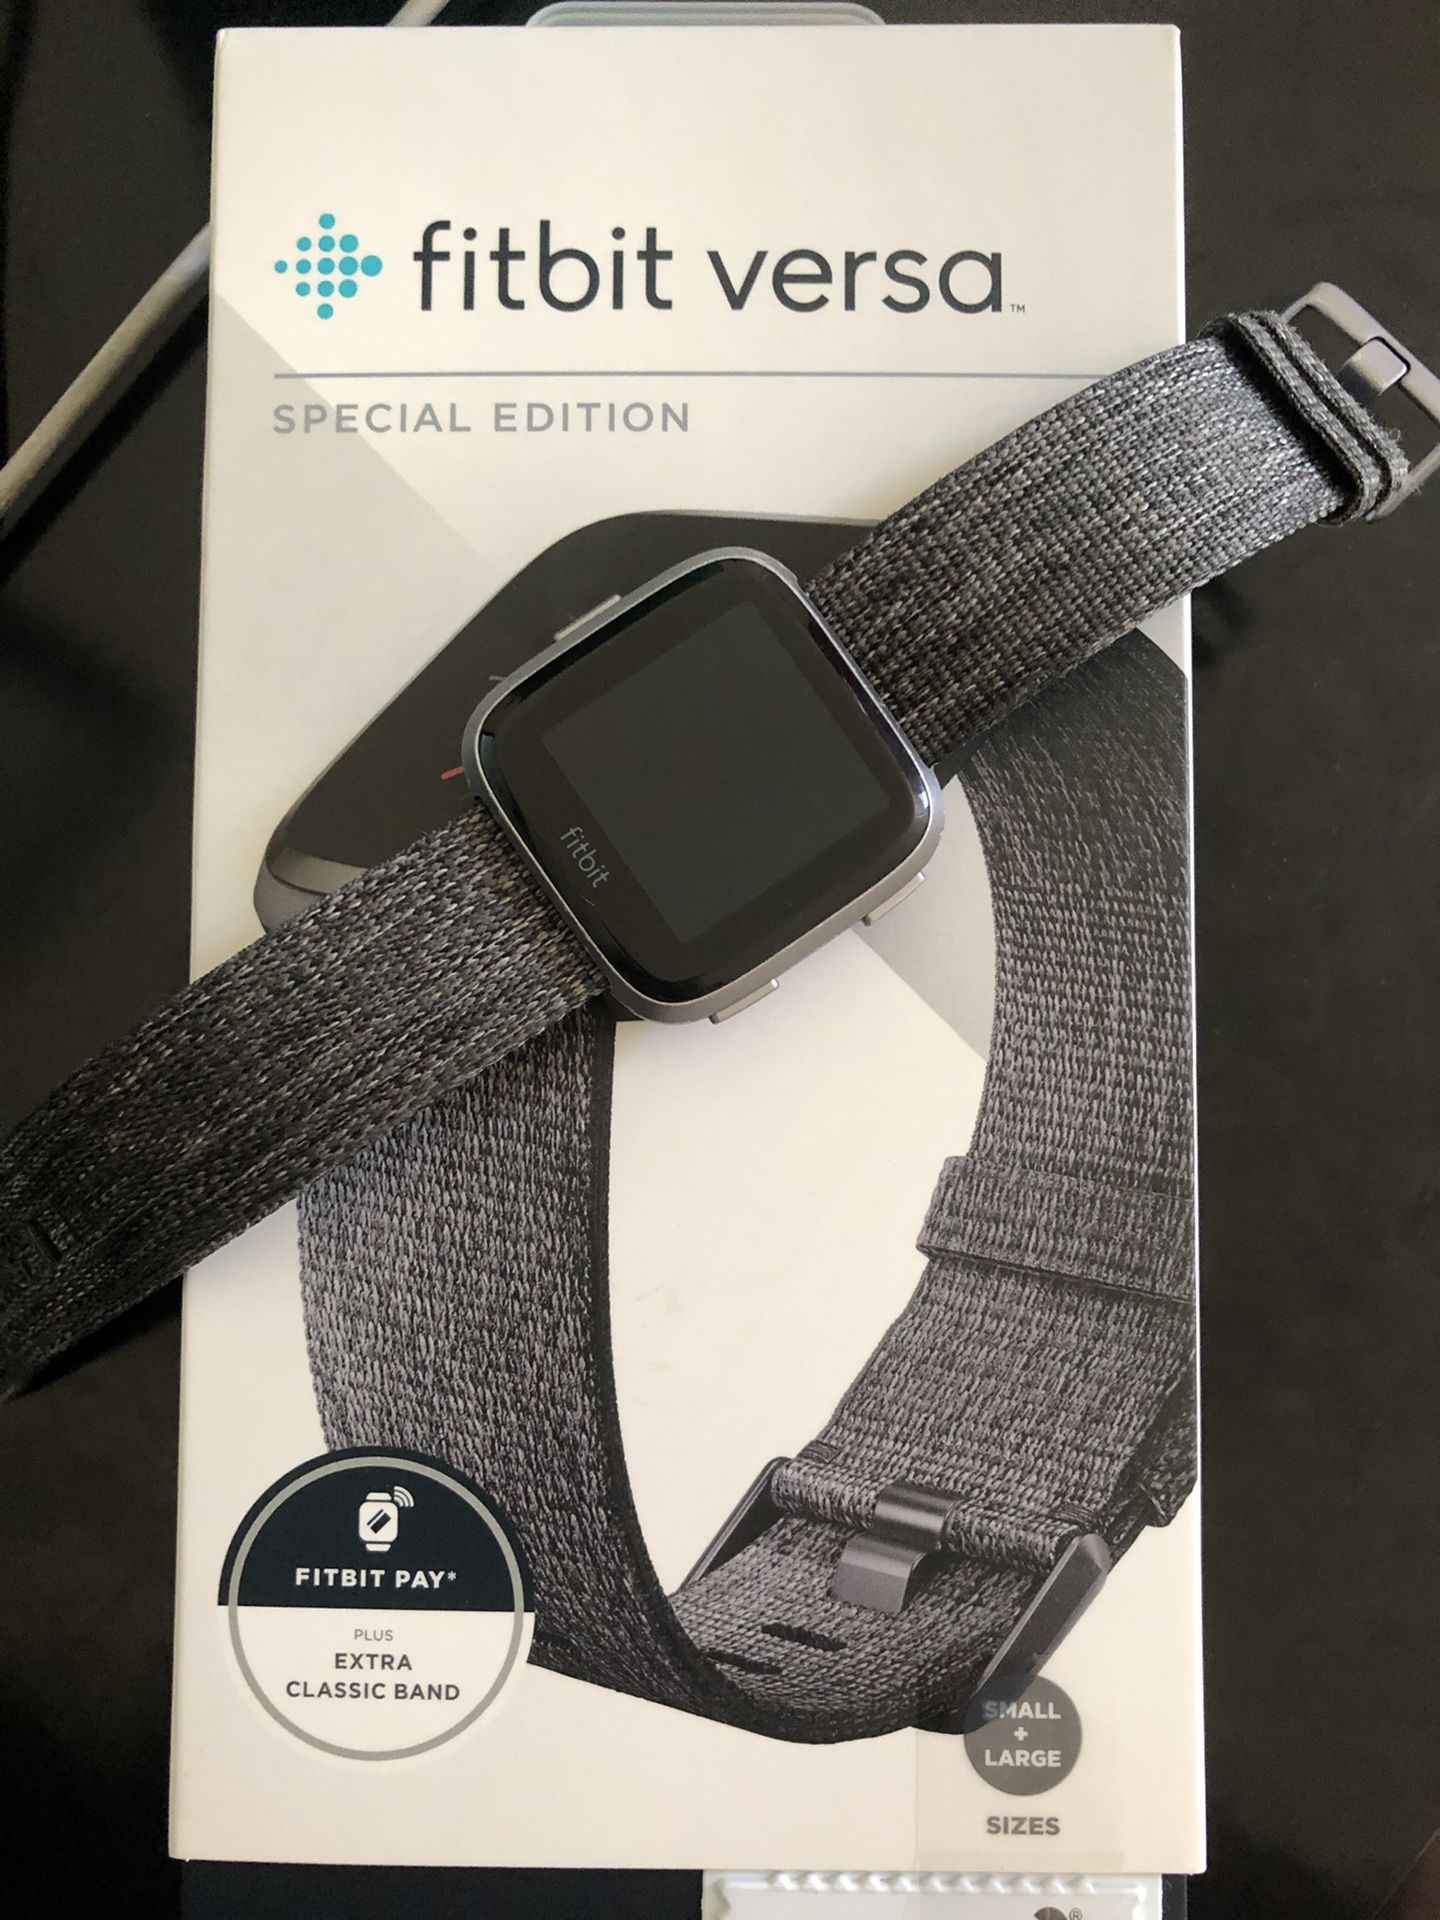 Fitbit versa special edition with Fitbit Pay